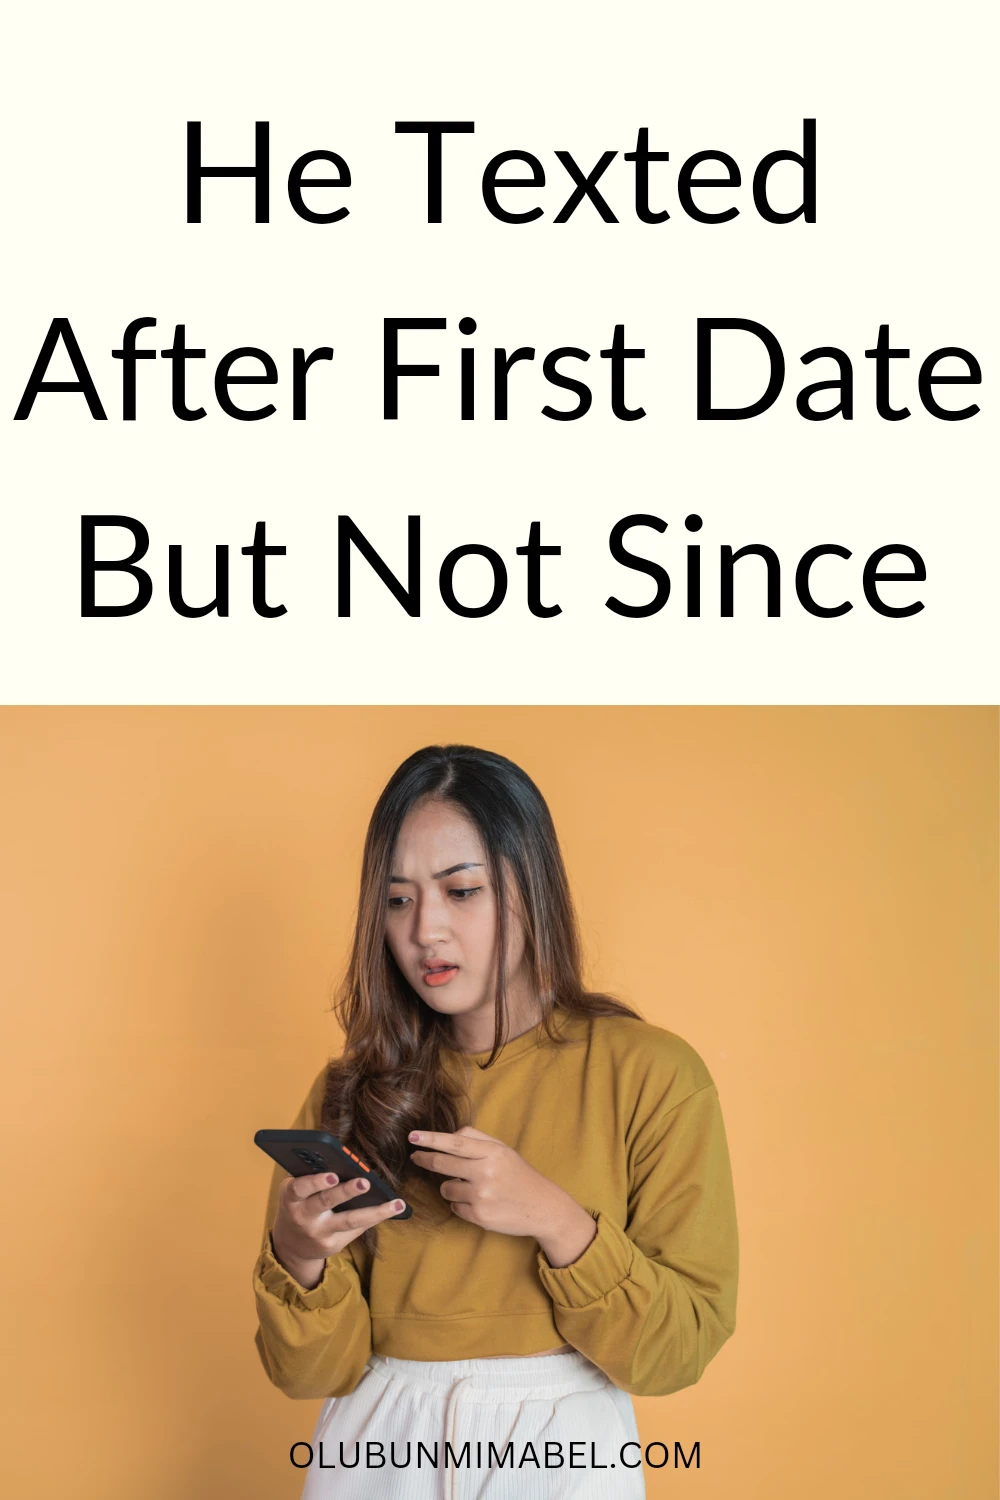 He Texted After First Date But Not Since